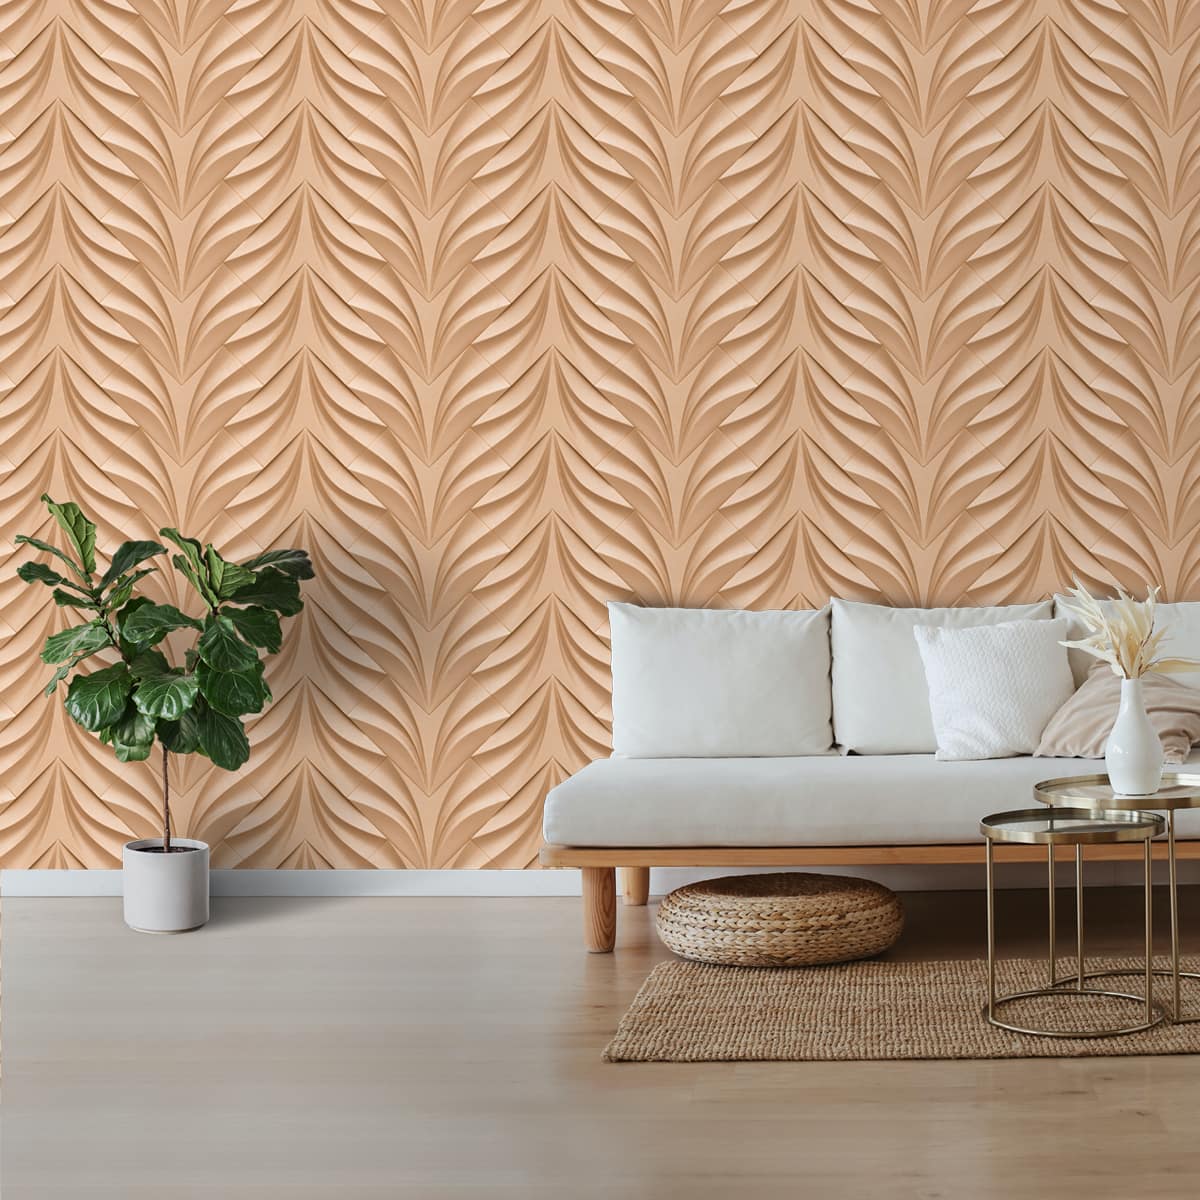 Decor Production Decorative Wallpaper, Wall Sticker for Bedroom, Living Room,  Hall, Home&Office Decor(newwall_D_4X7_01) : Amazon.in: Home Improvement